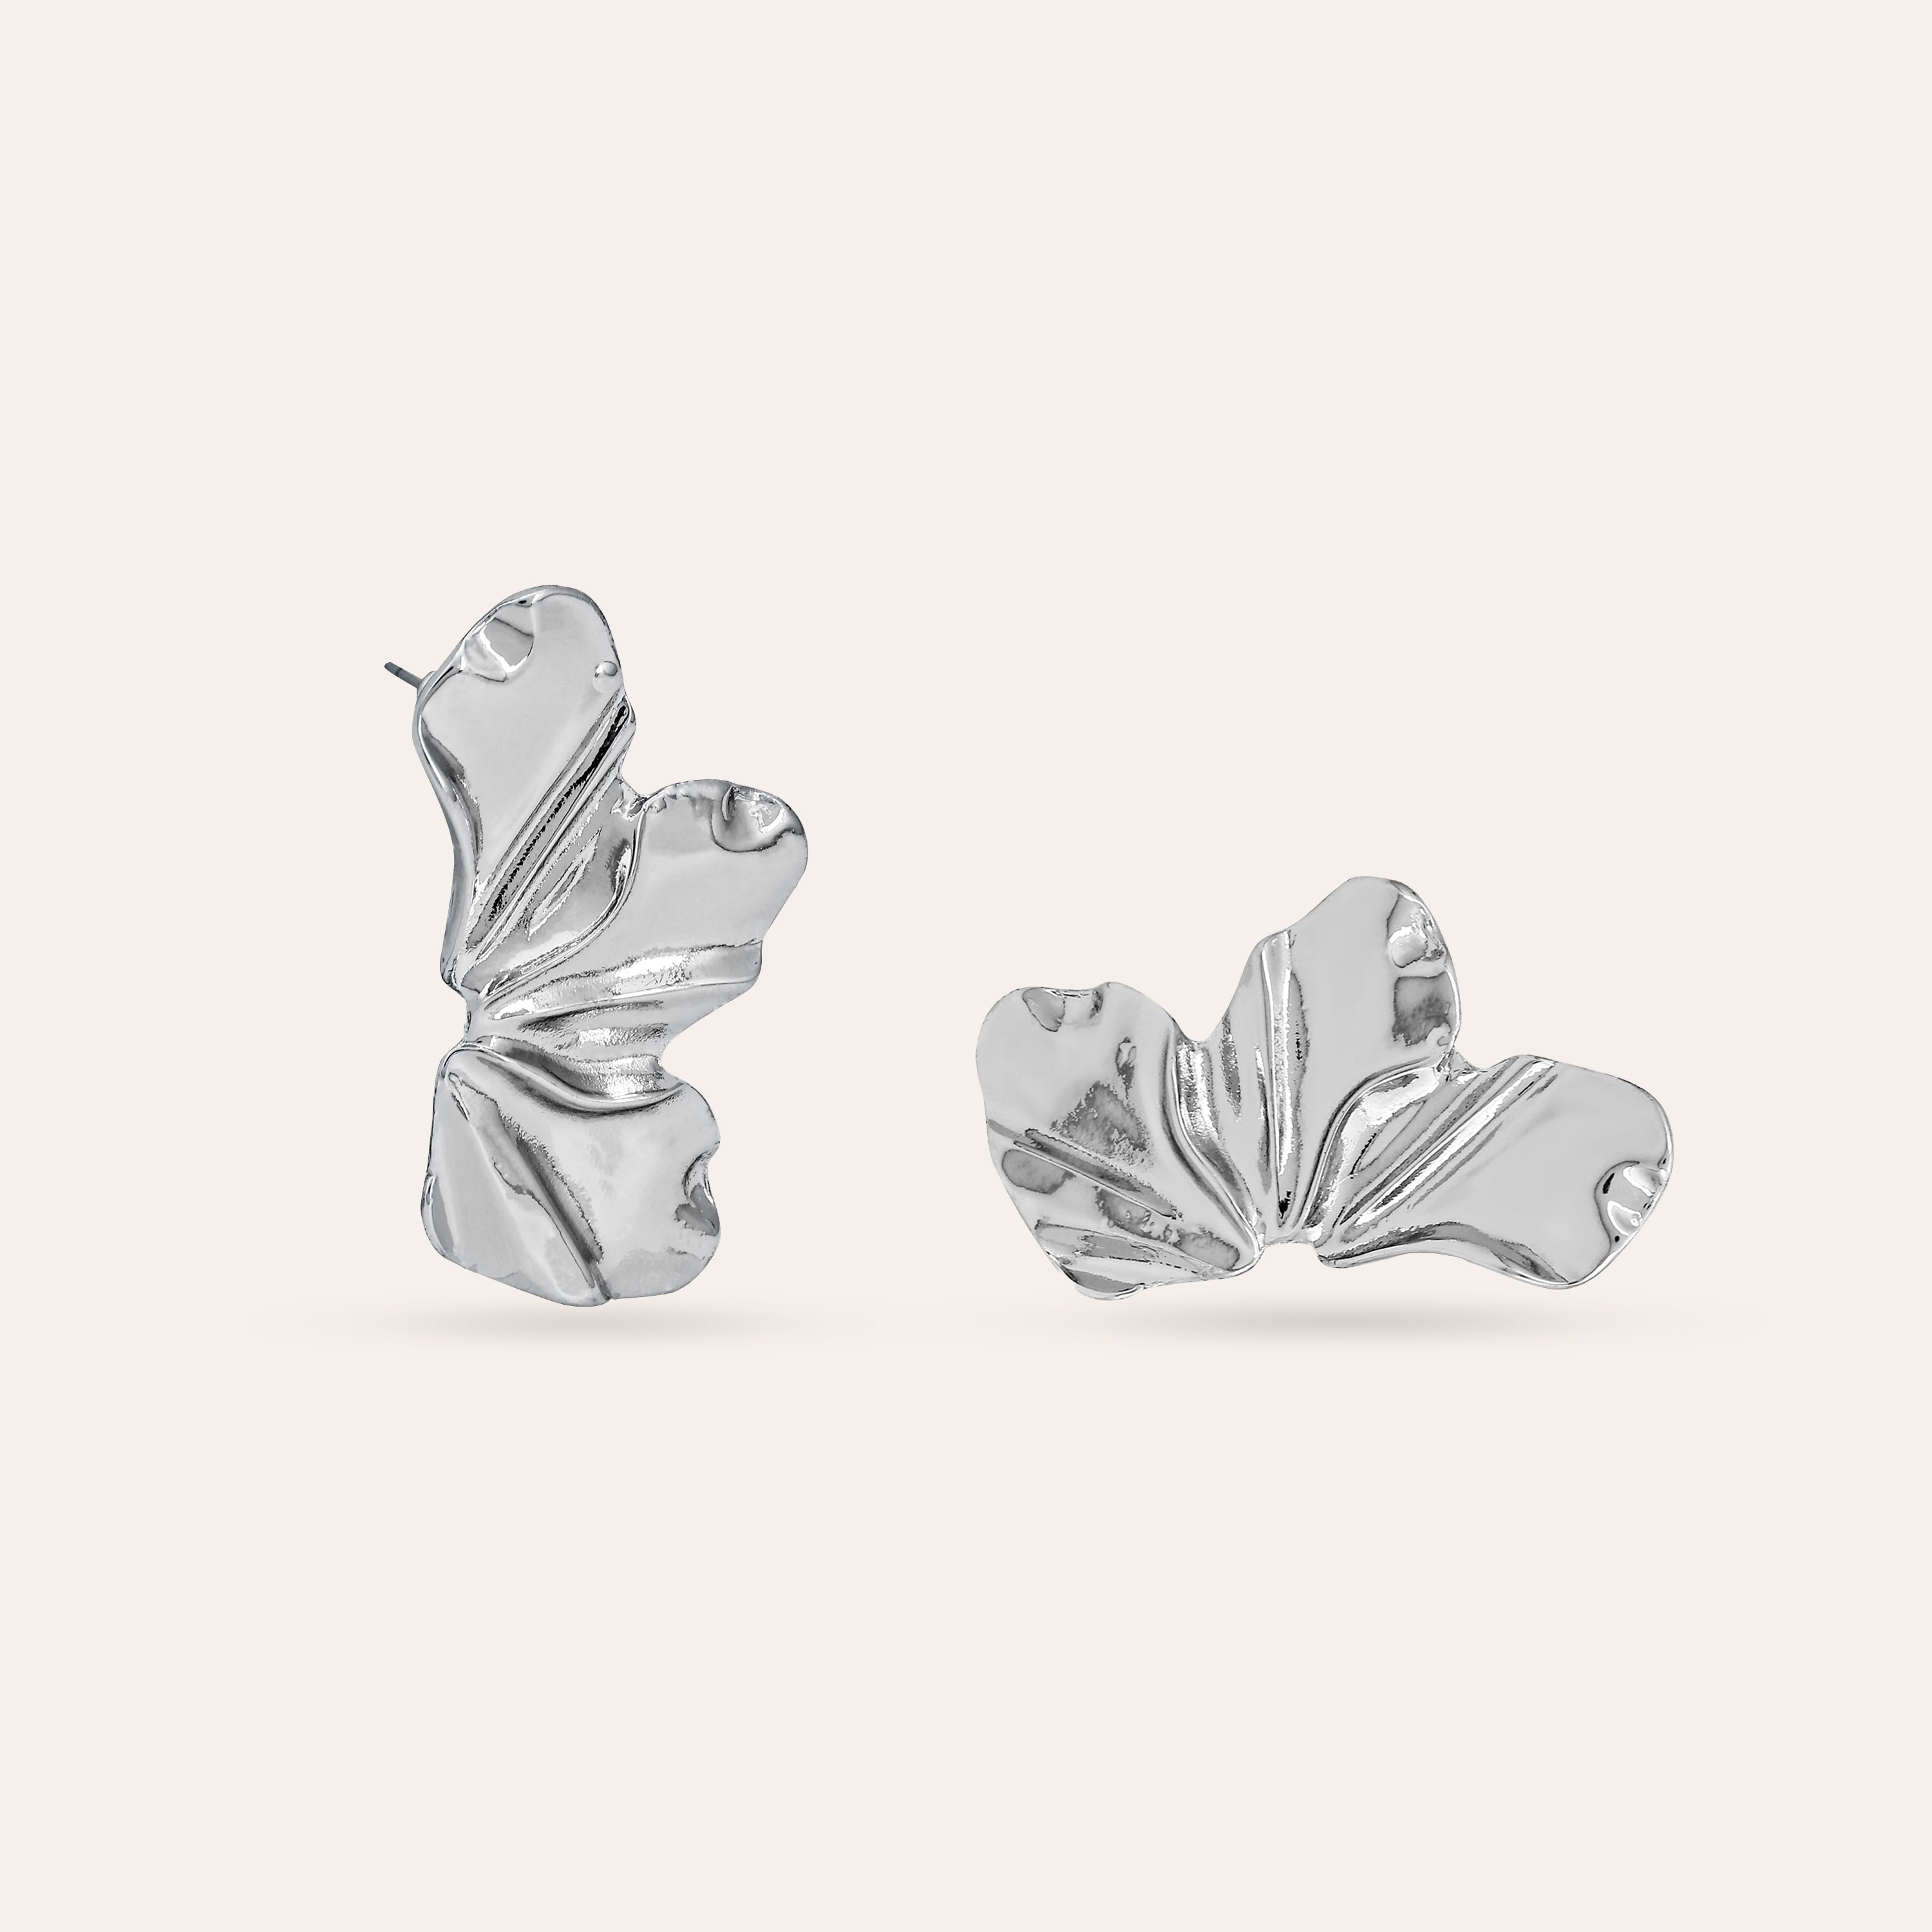 TFC Bling Blossom Silver Plated Stud Earrings-Discover daily wear gold earrings including stud earrings, hoop earrings, and pearl earrings, perfect as earrings for women and earrings for girls.Find the cheapest fashion jewellery which is anti-tarnish only at The Fun company